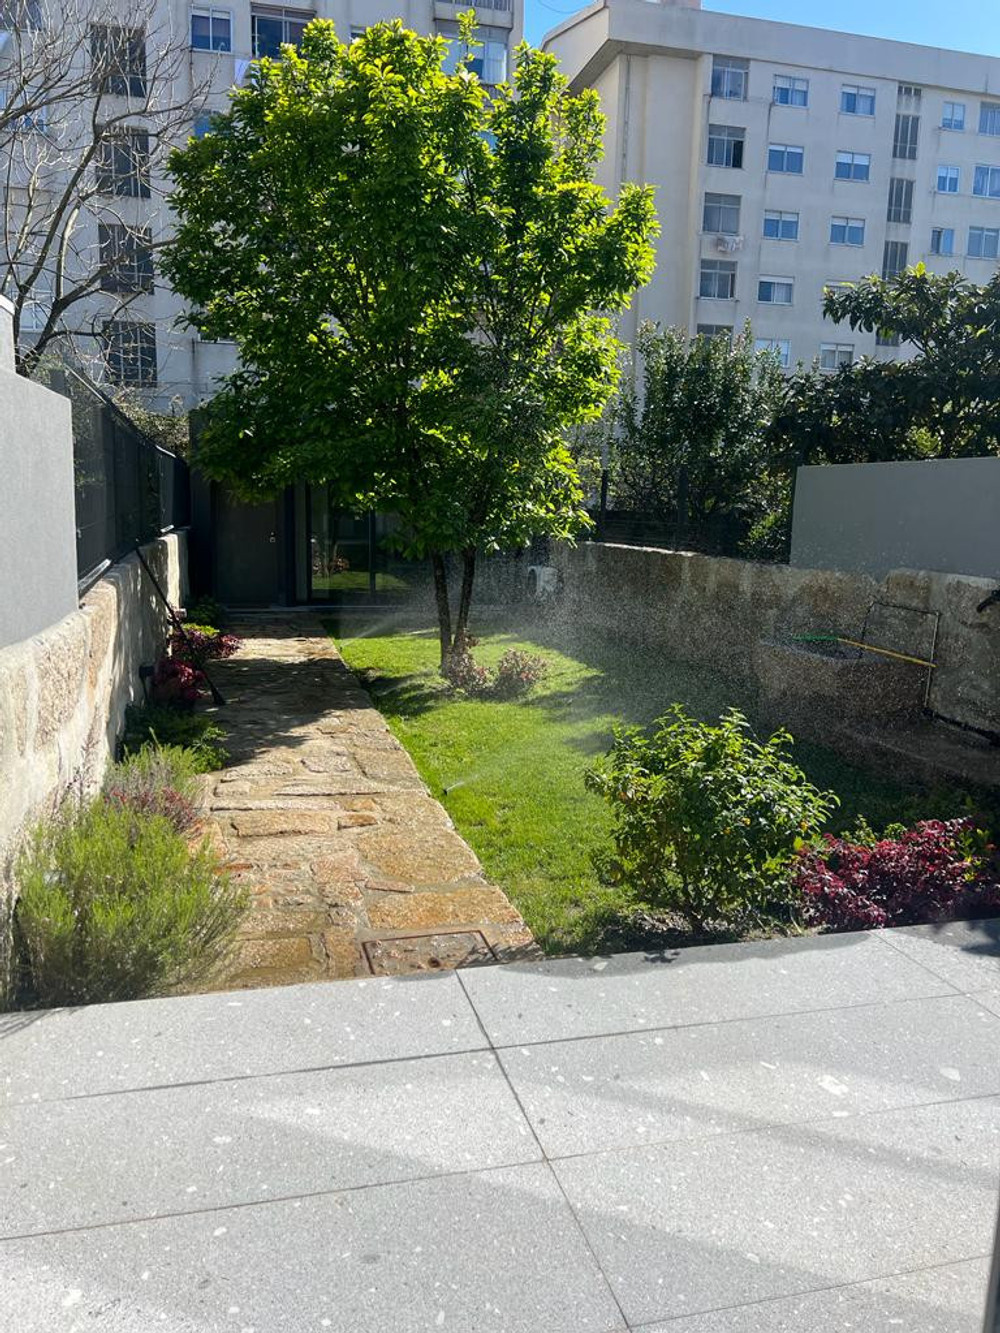 2 bedroom apartment with private garden